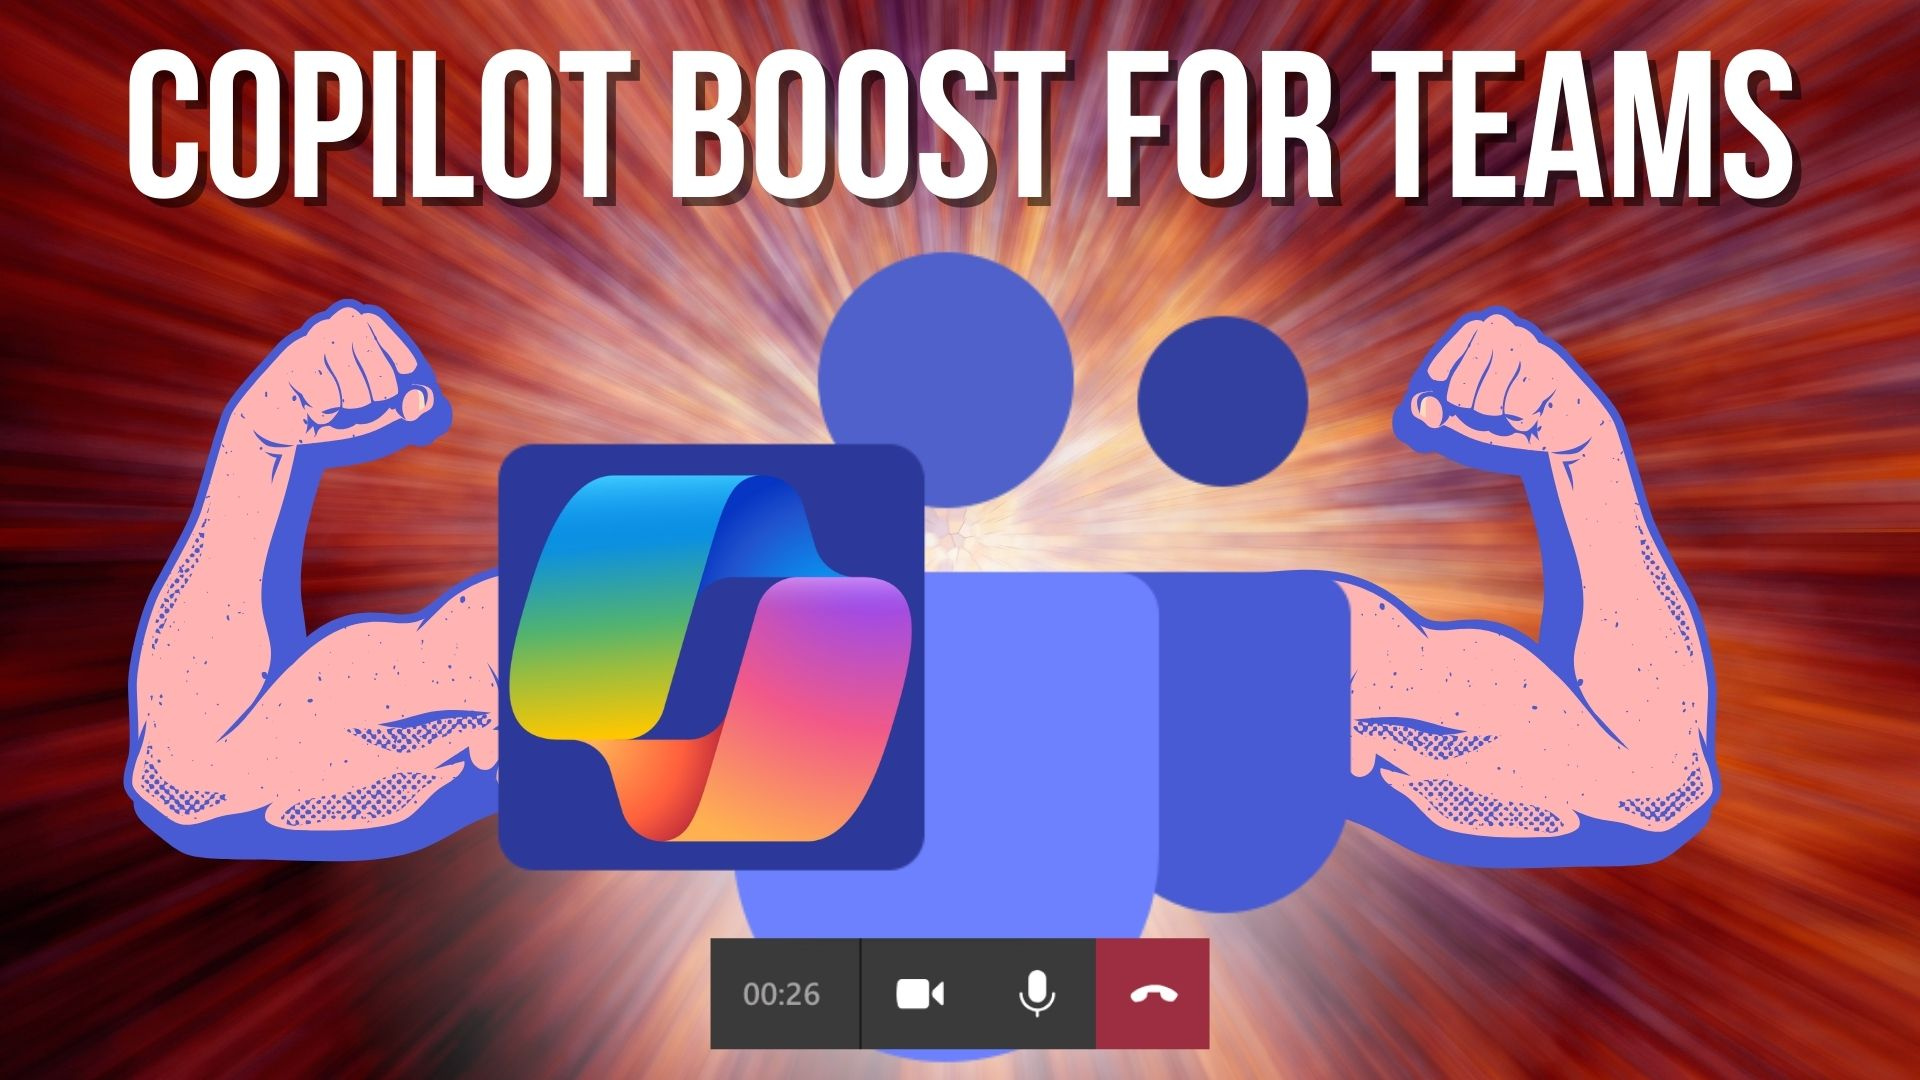 copilot boost for teams with copilot showing